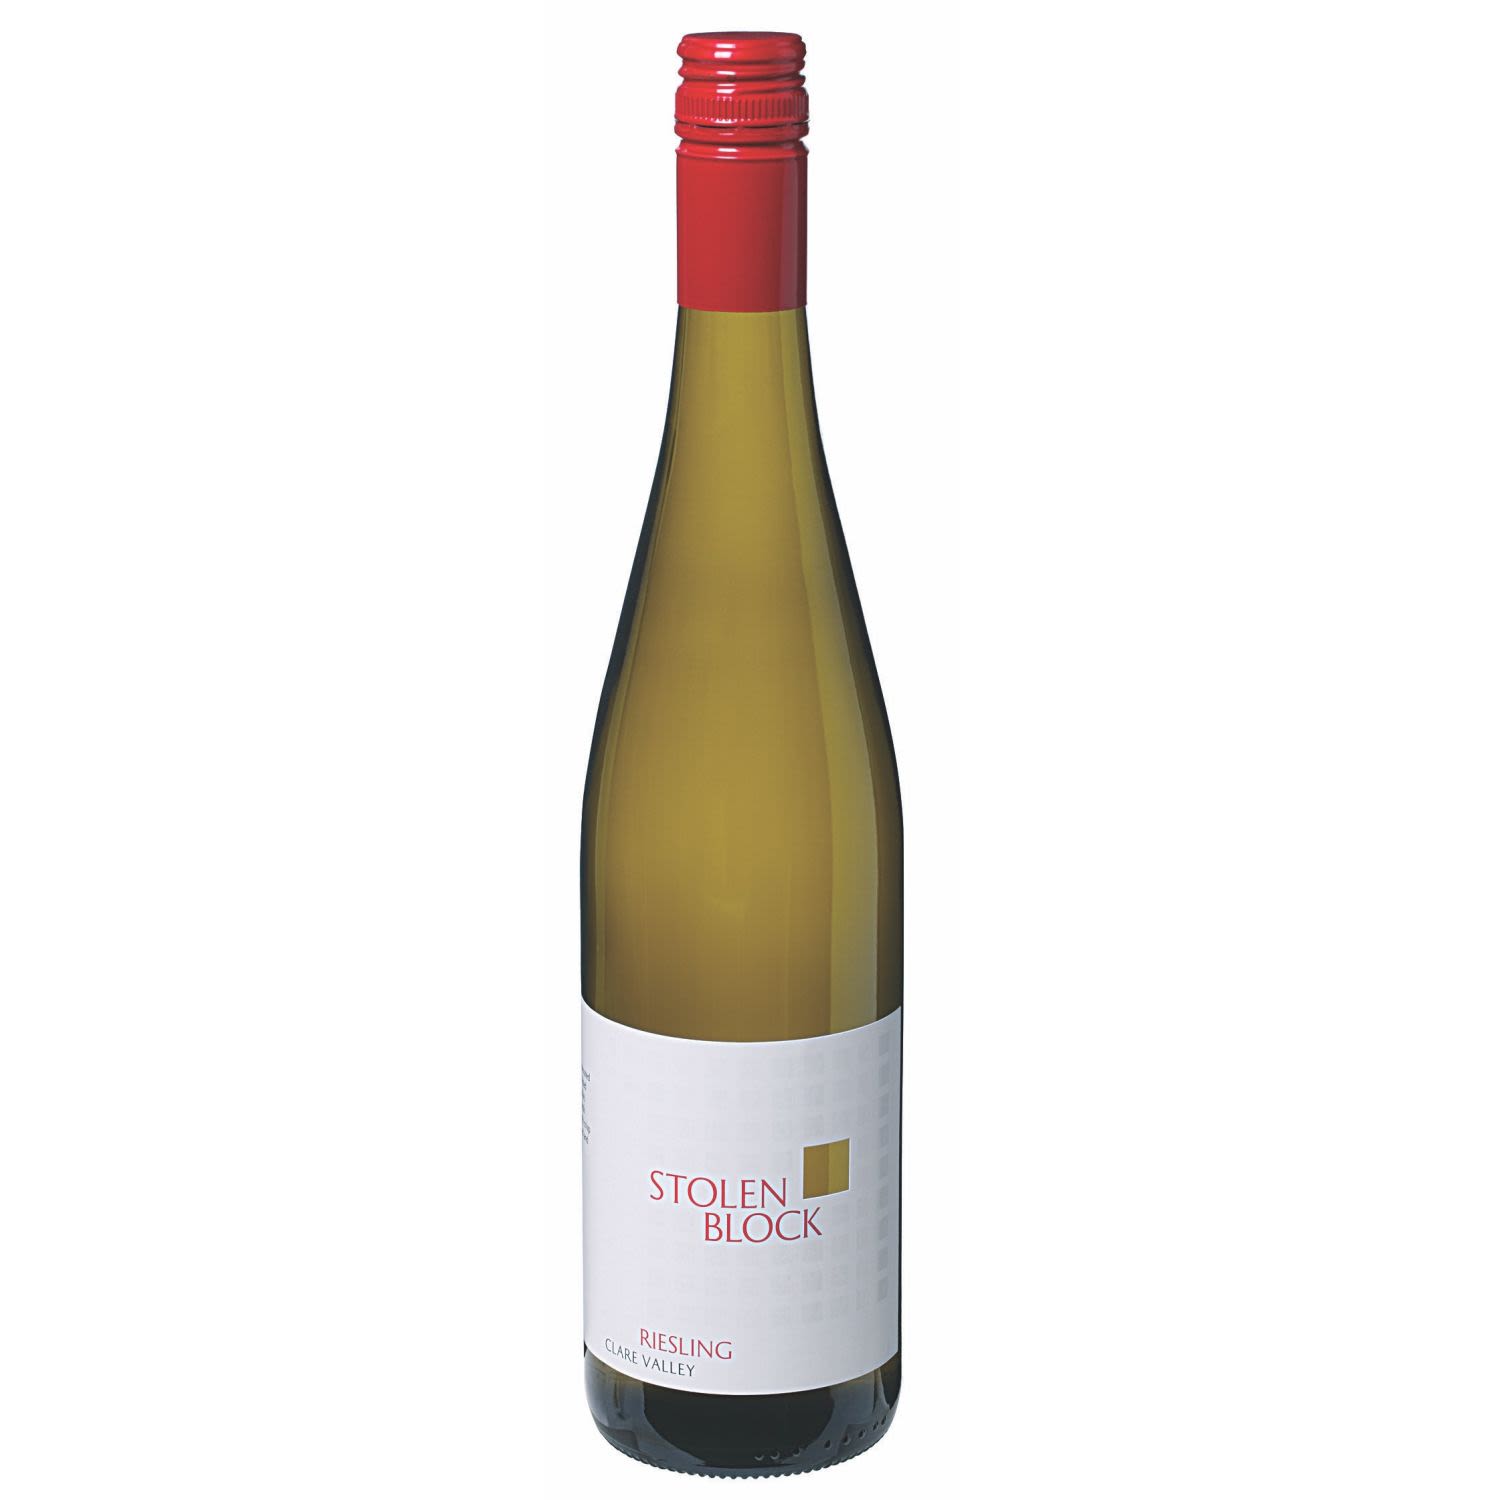 This riesling is sourced from our elevated vineyards in the Clare Valley and has a lifted floral bouquet of blossom and honeysuckle. With flavours of crunchy green apple, fresh lime and lemon, this wine is finished with crisp balanced acid and is best enjoyed chilled and in moderation.<br /> <br />Alcohol Volume: 13.00%<br /><br />Pack Format: Bottle<br /><br />Standard Drinks: 7.7</br /><br />Pack Type: Bottle<br /><br />Country of Origin: Australia<br /><br />Region: Clare Valley<br /><br />Vintage: Vintages Vary<br />